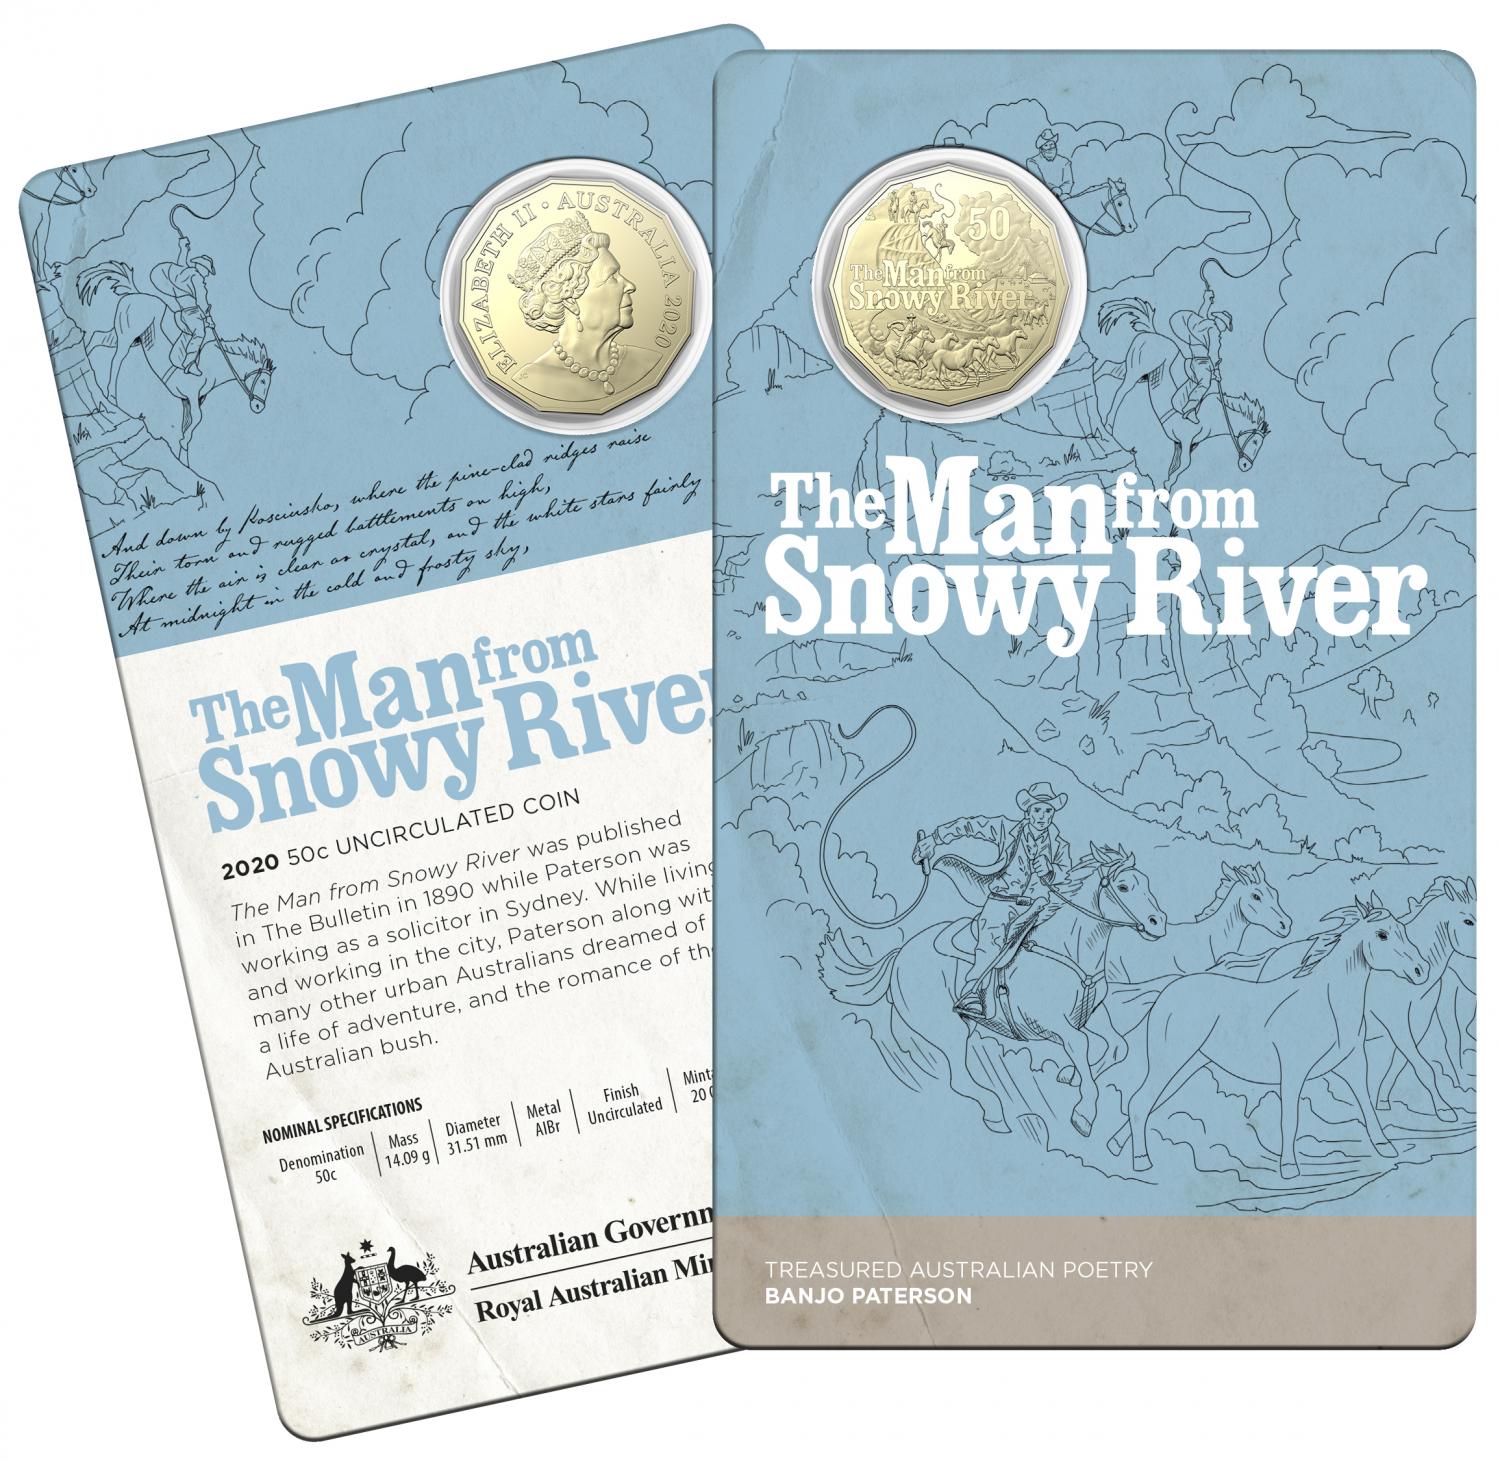 Thumbnail for 2020 50c Uncirculated Coin Treasured Australian Poetry Banjo Paterson - The Man From Snowy River